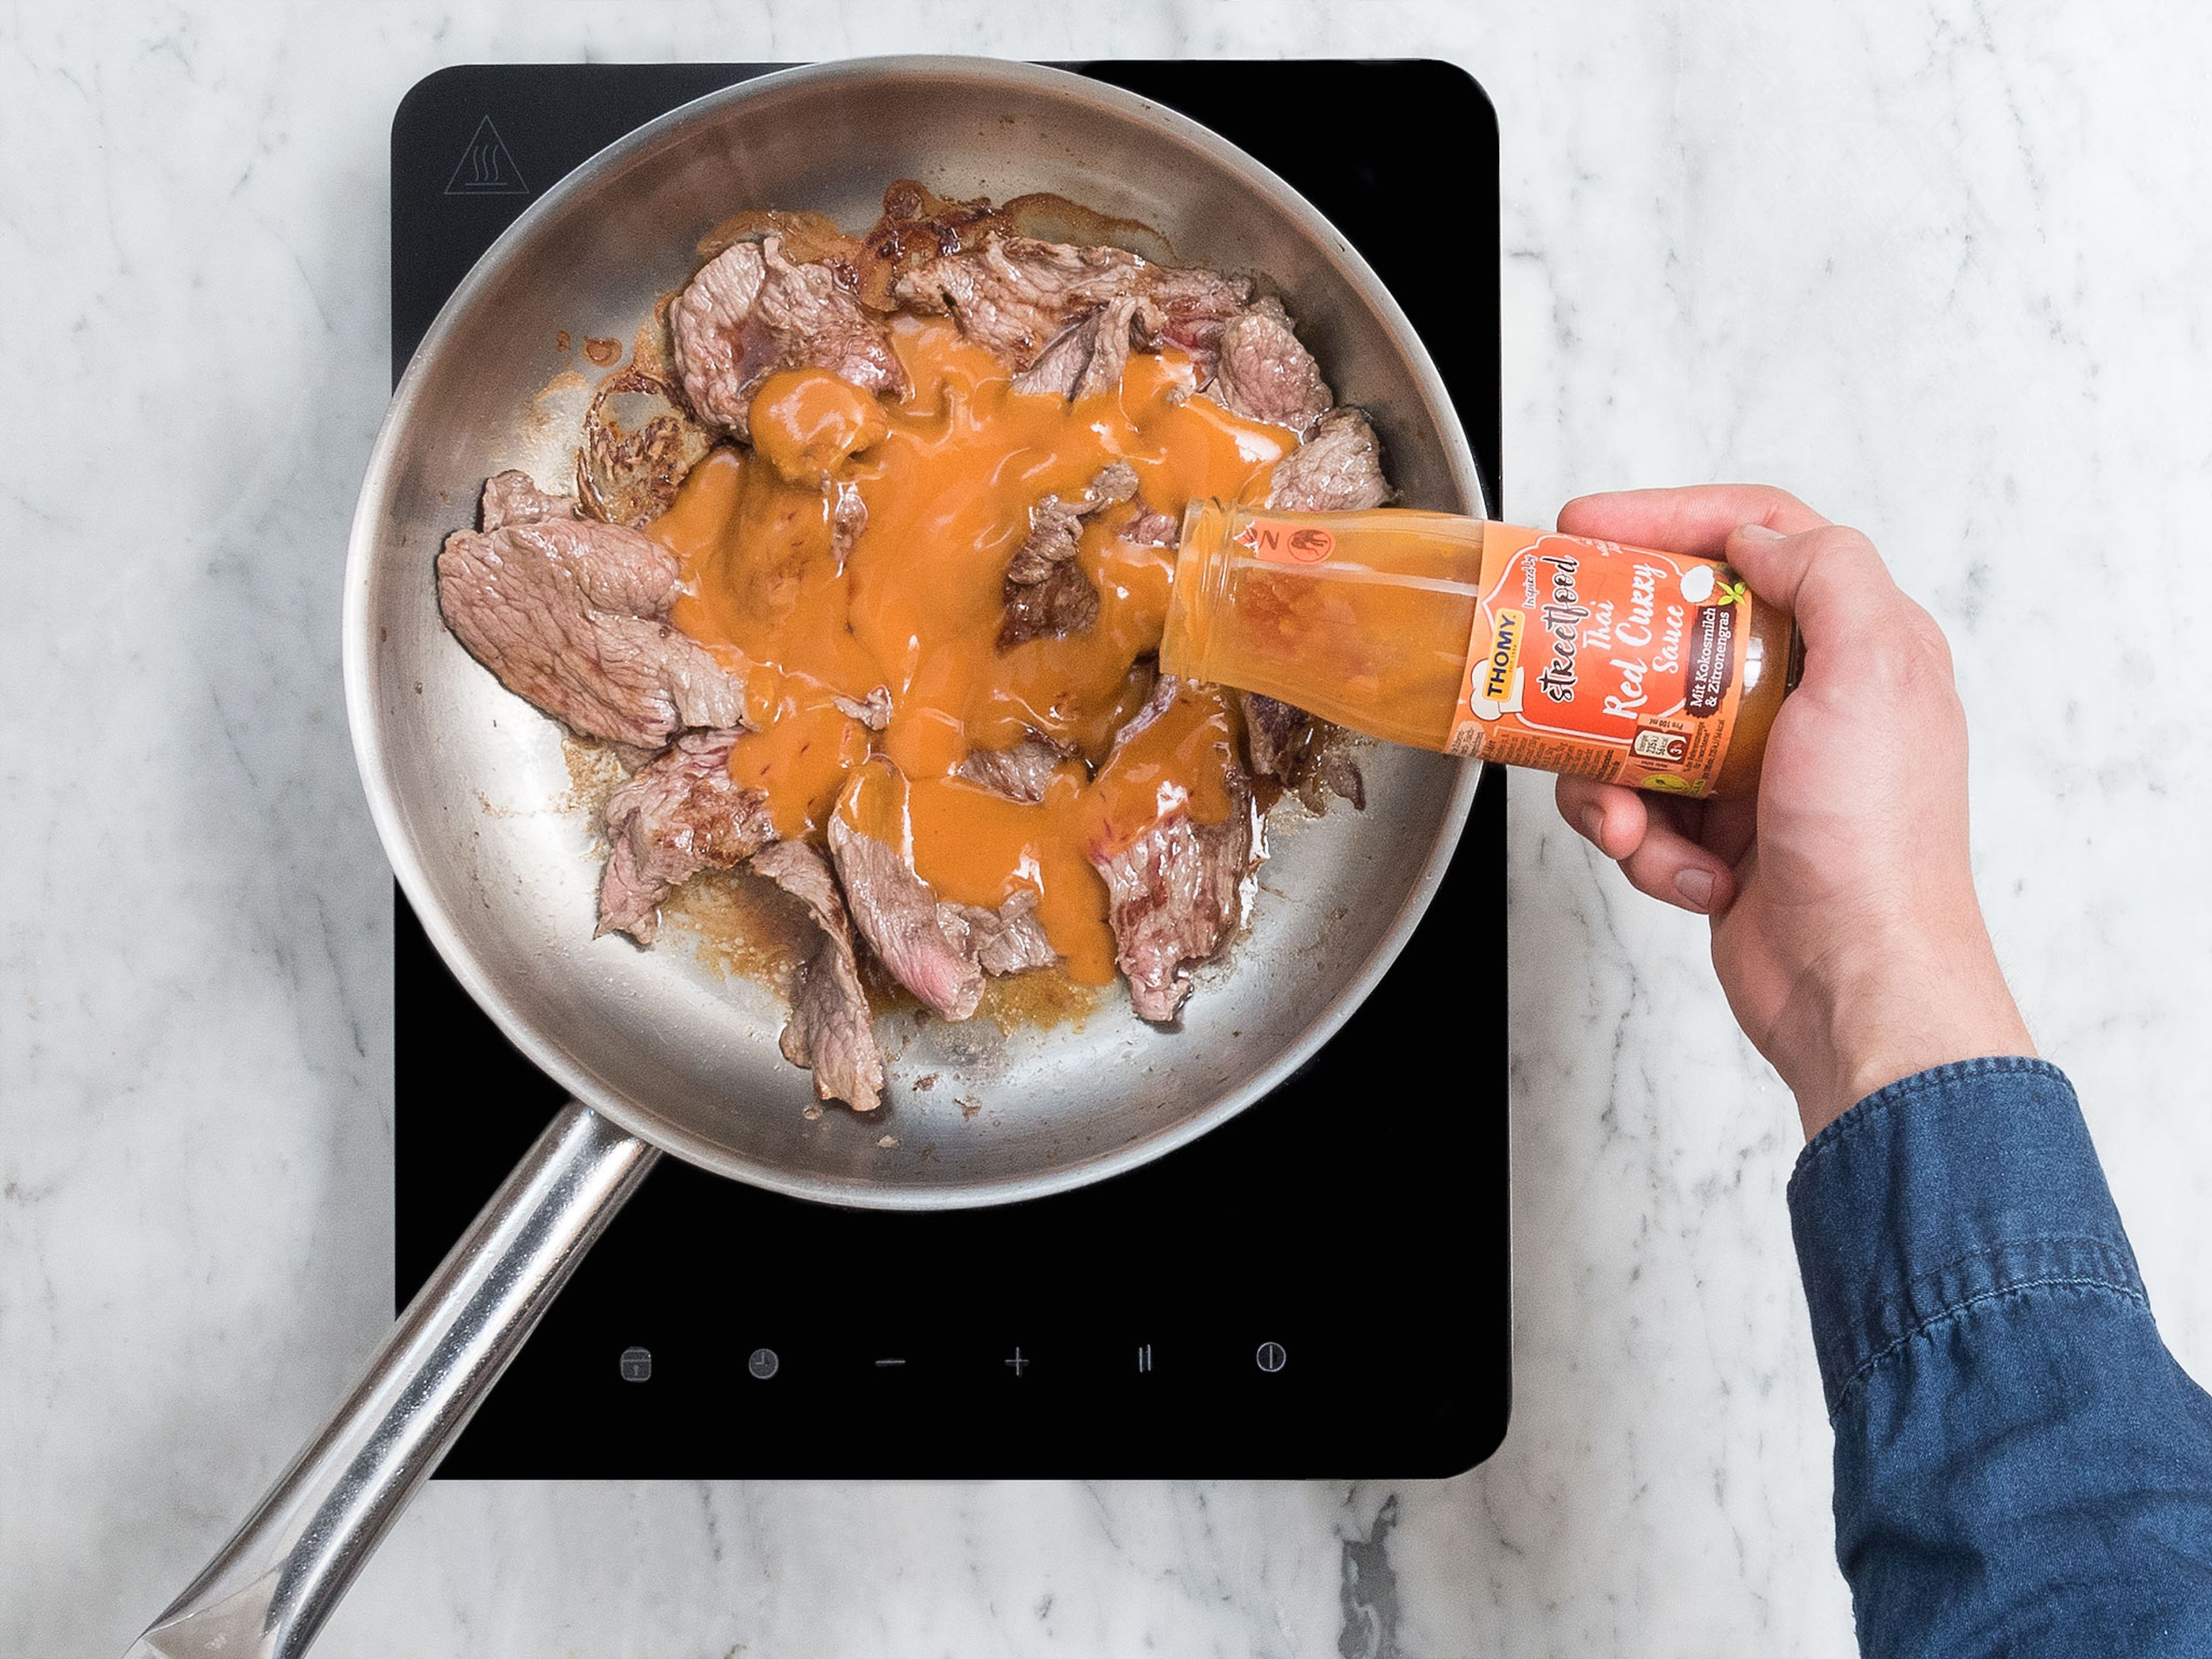 In a frying pan, heat vegetable oil over medium-high heat. Add beef strips and sear for approx. 2 – 3 min. Add Thai red curry sauce, reduce heat, and let simmer for approx. 3 – 5 min.